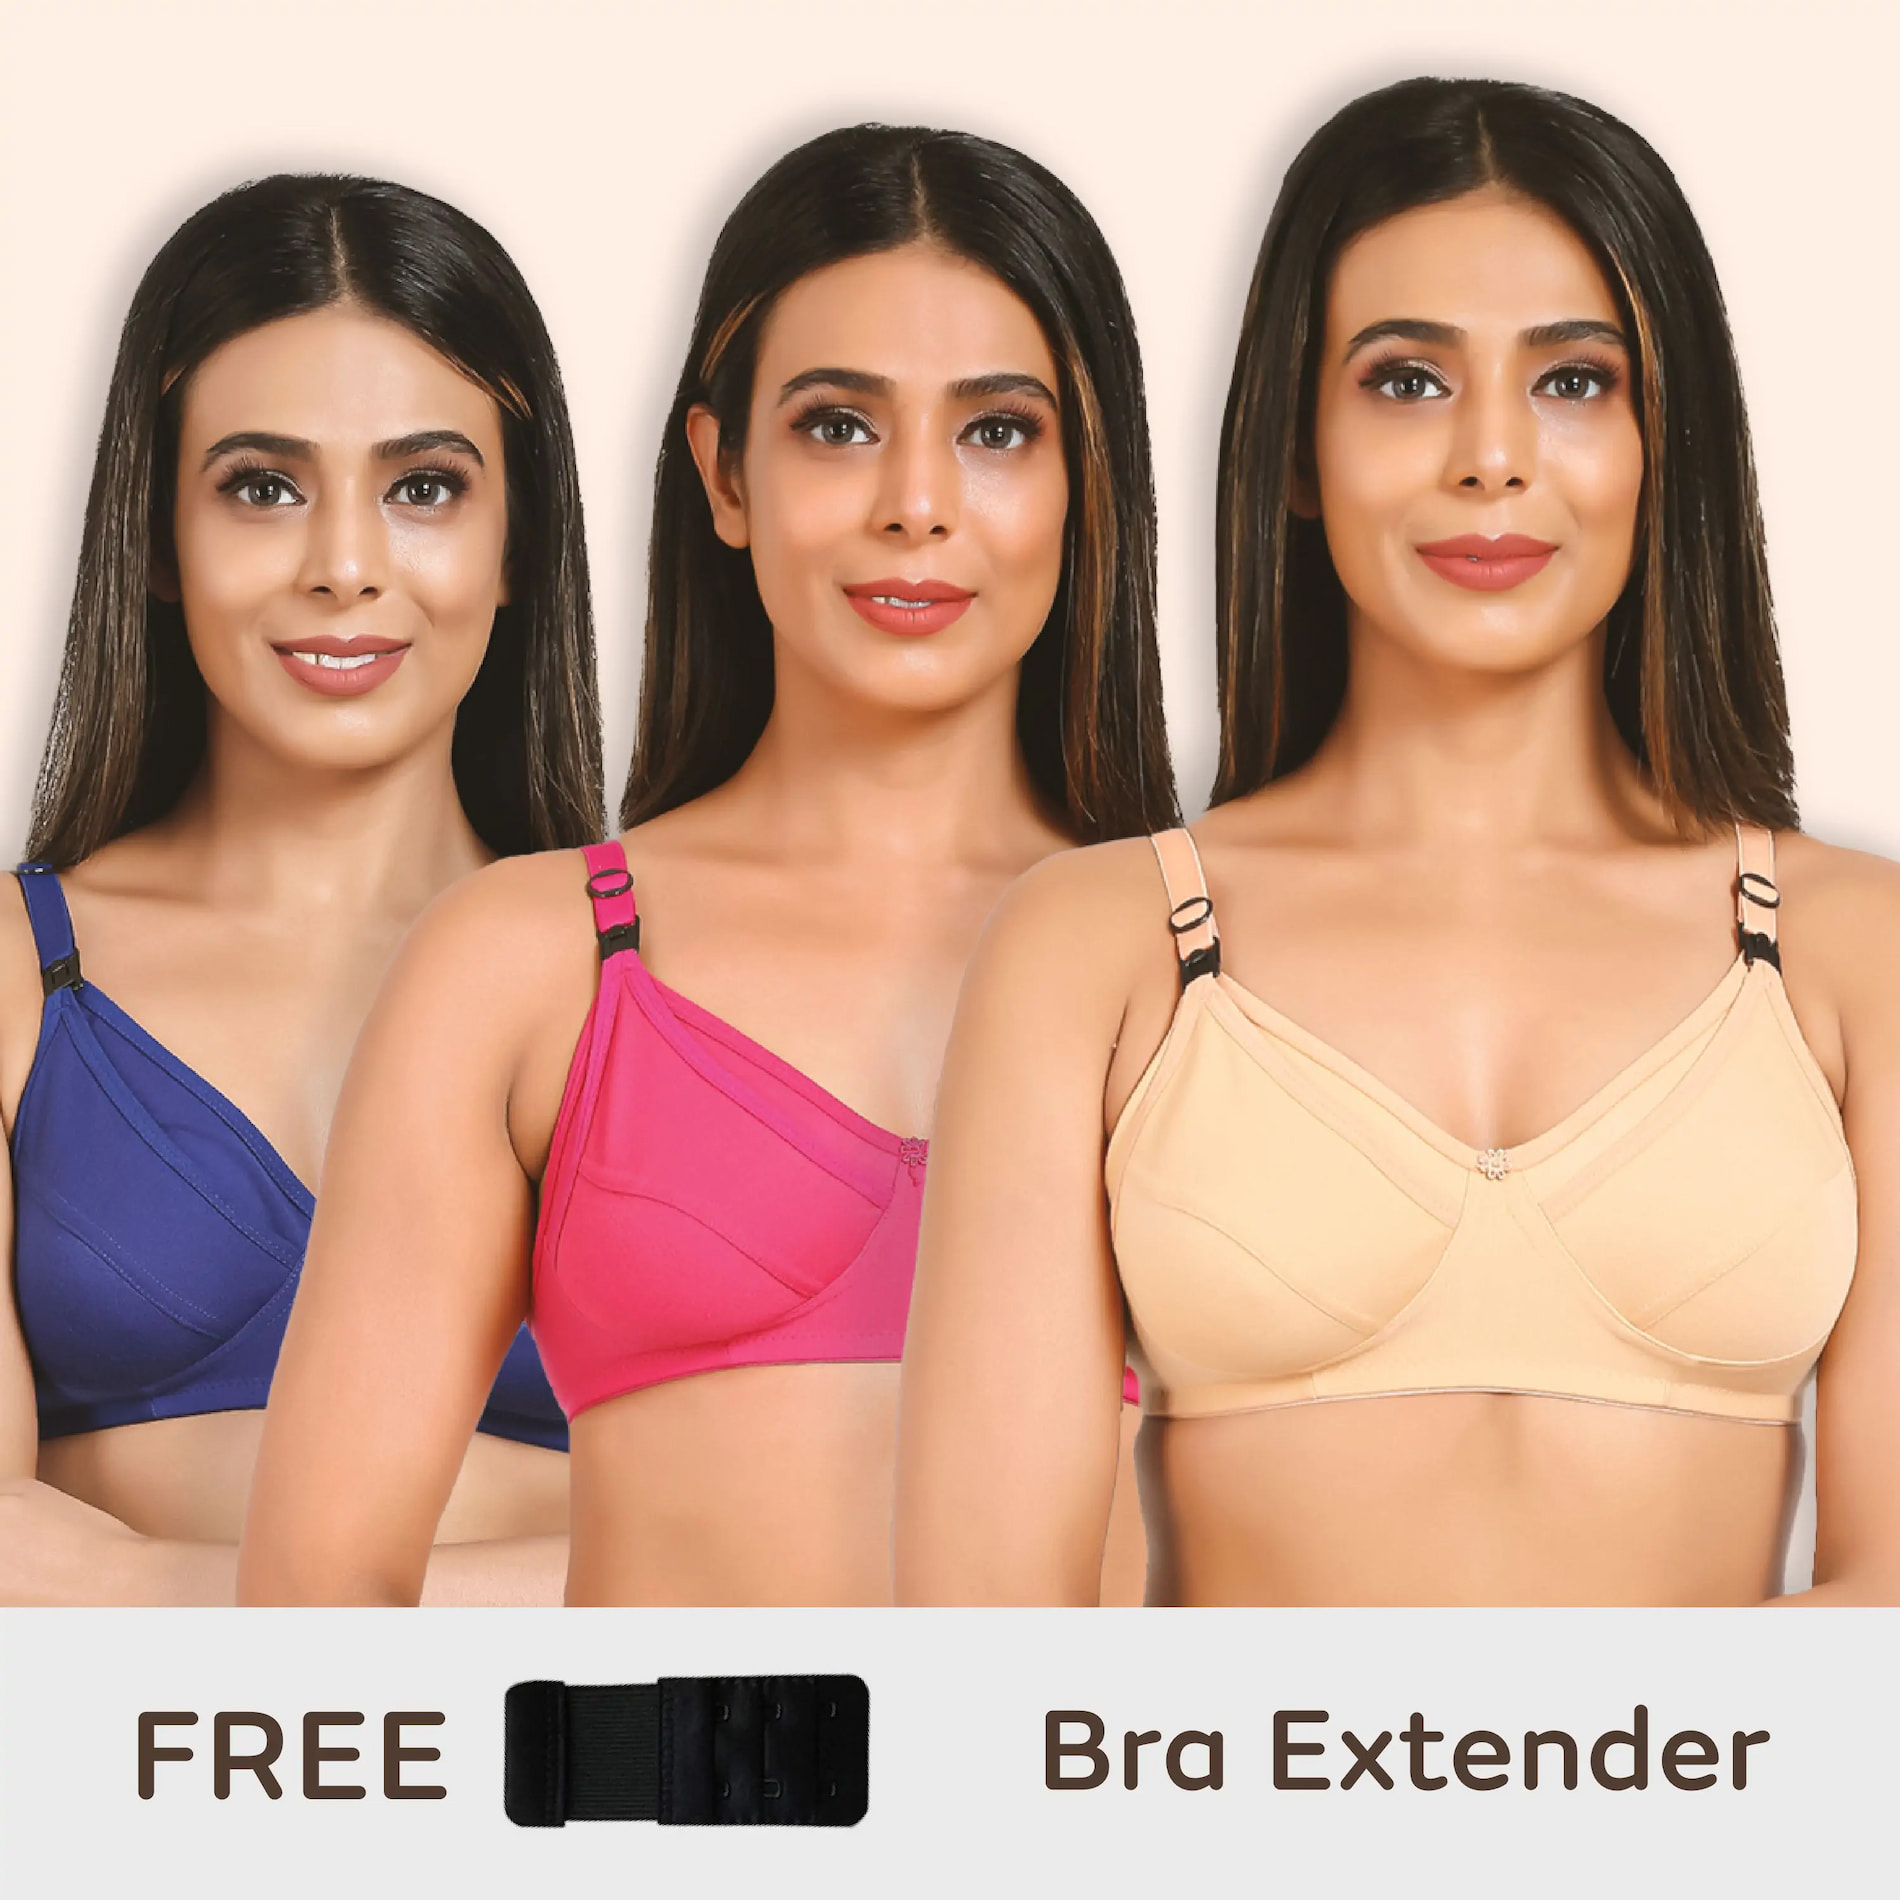 Maternity/Nursing Bras Non-Wired, Non-Padded - Pack of 3 with free Bra Extender (Sandalwood, Persian Blue & Dark pink) 36 B